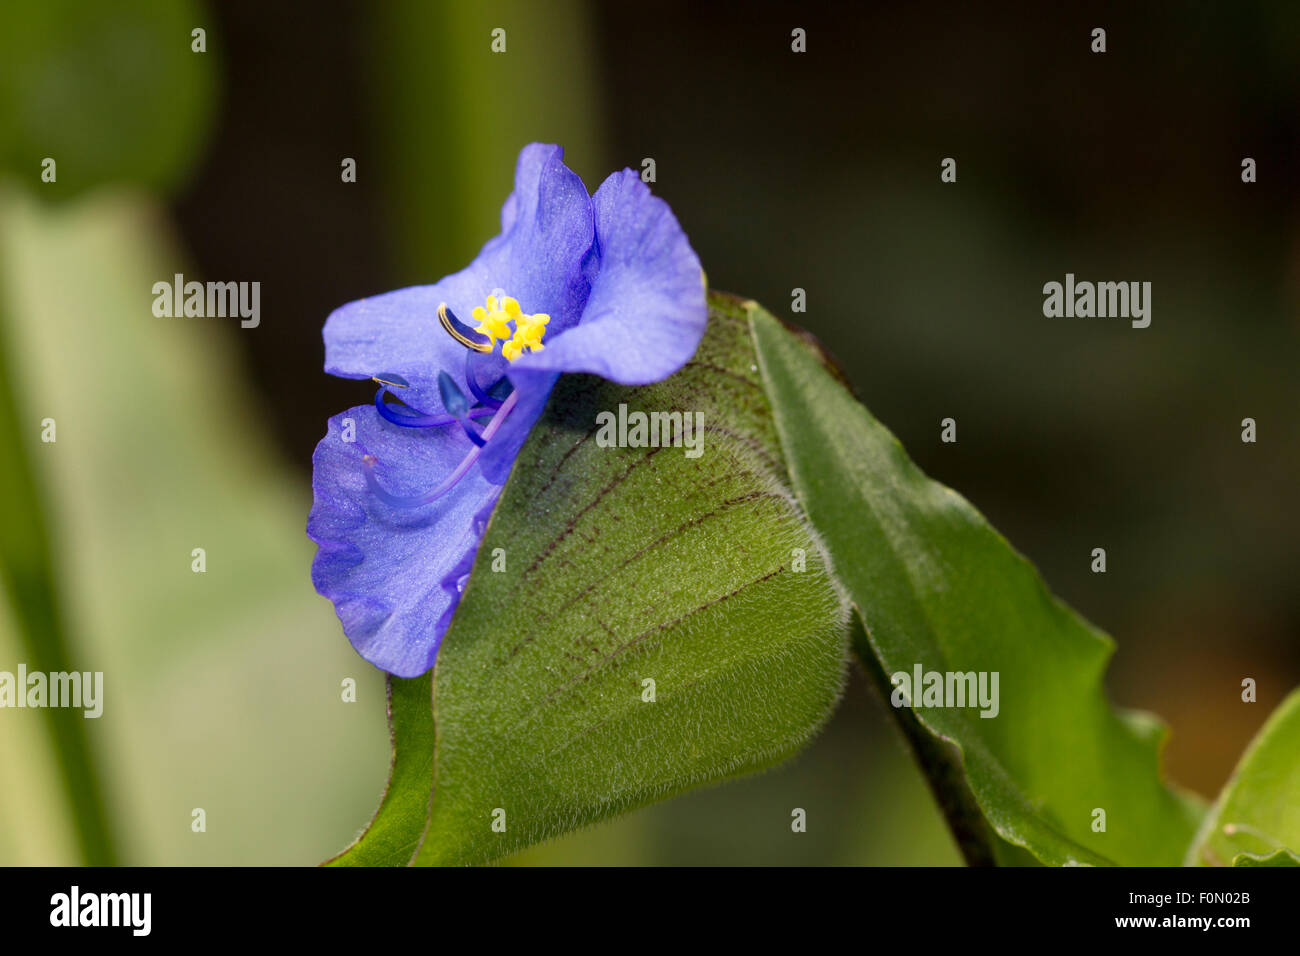 Single blue flowers are produced on a daily basis from the inflated terminal buds of Commelina tuberosa Coelestis Group Stock Photo